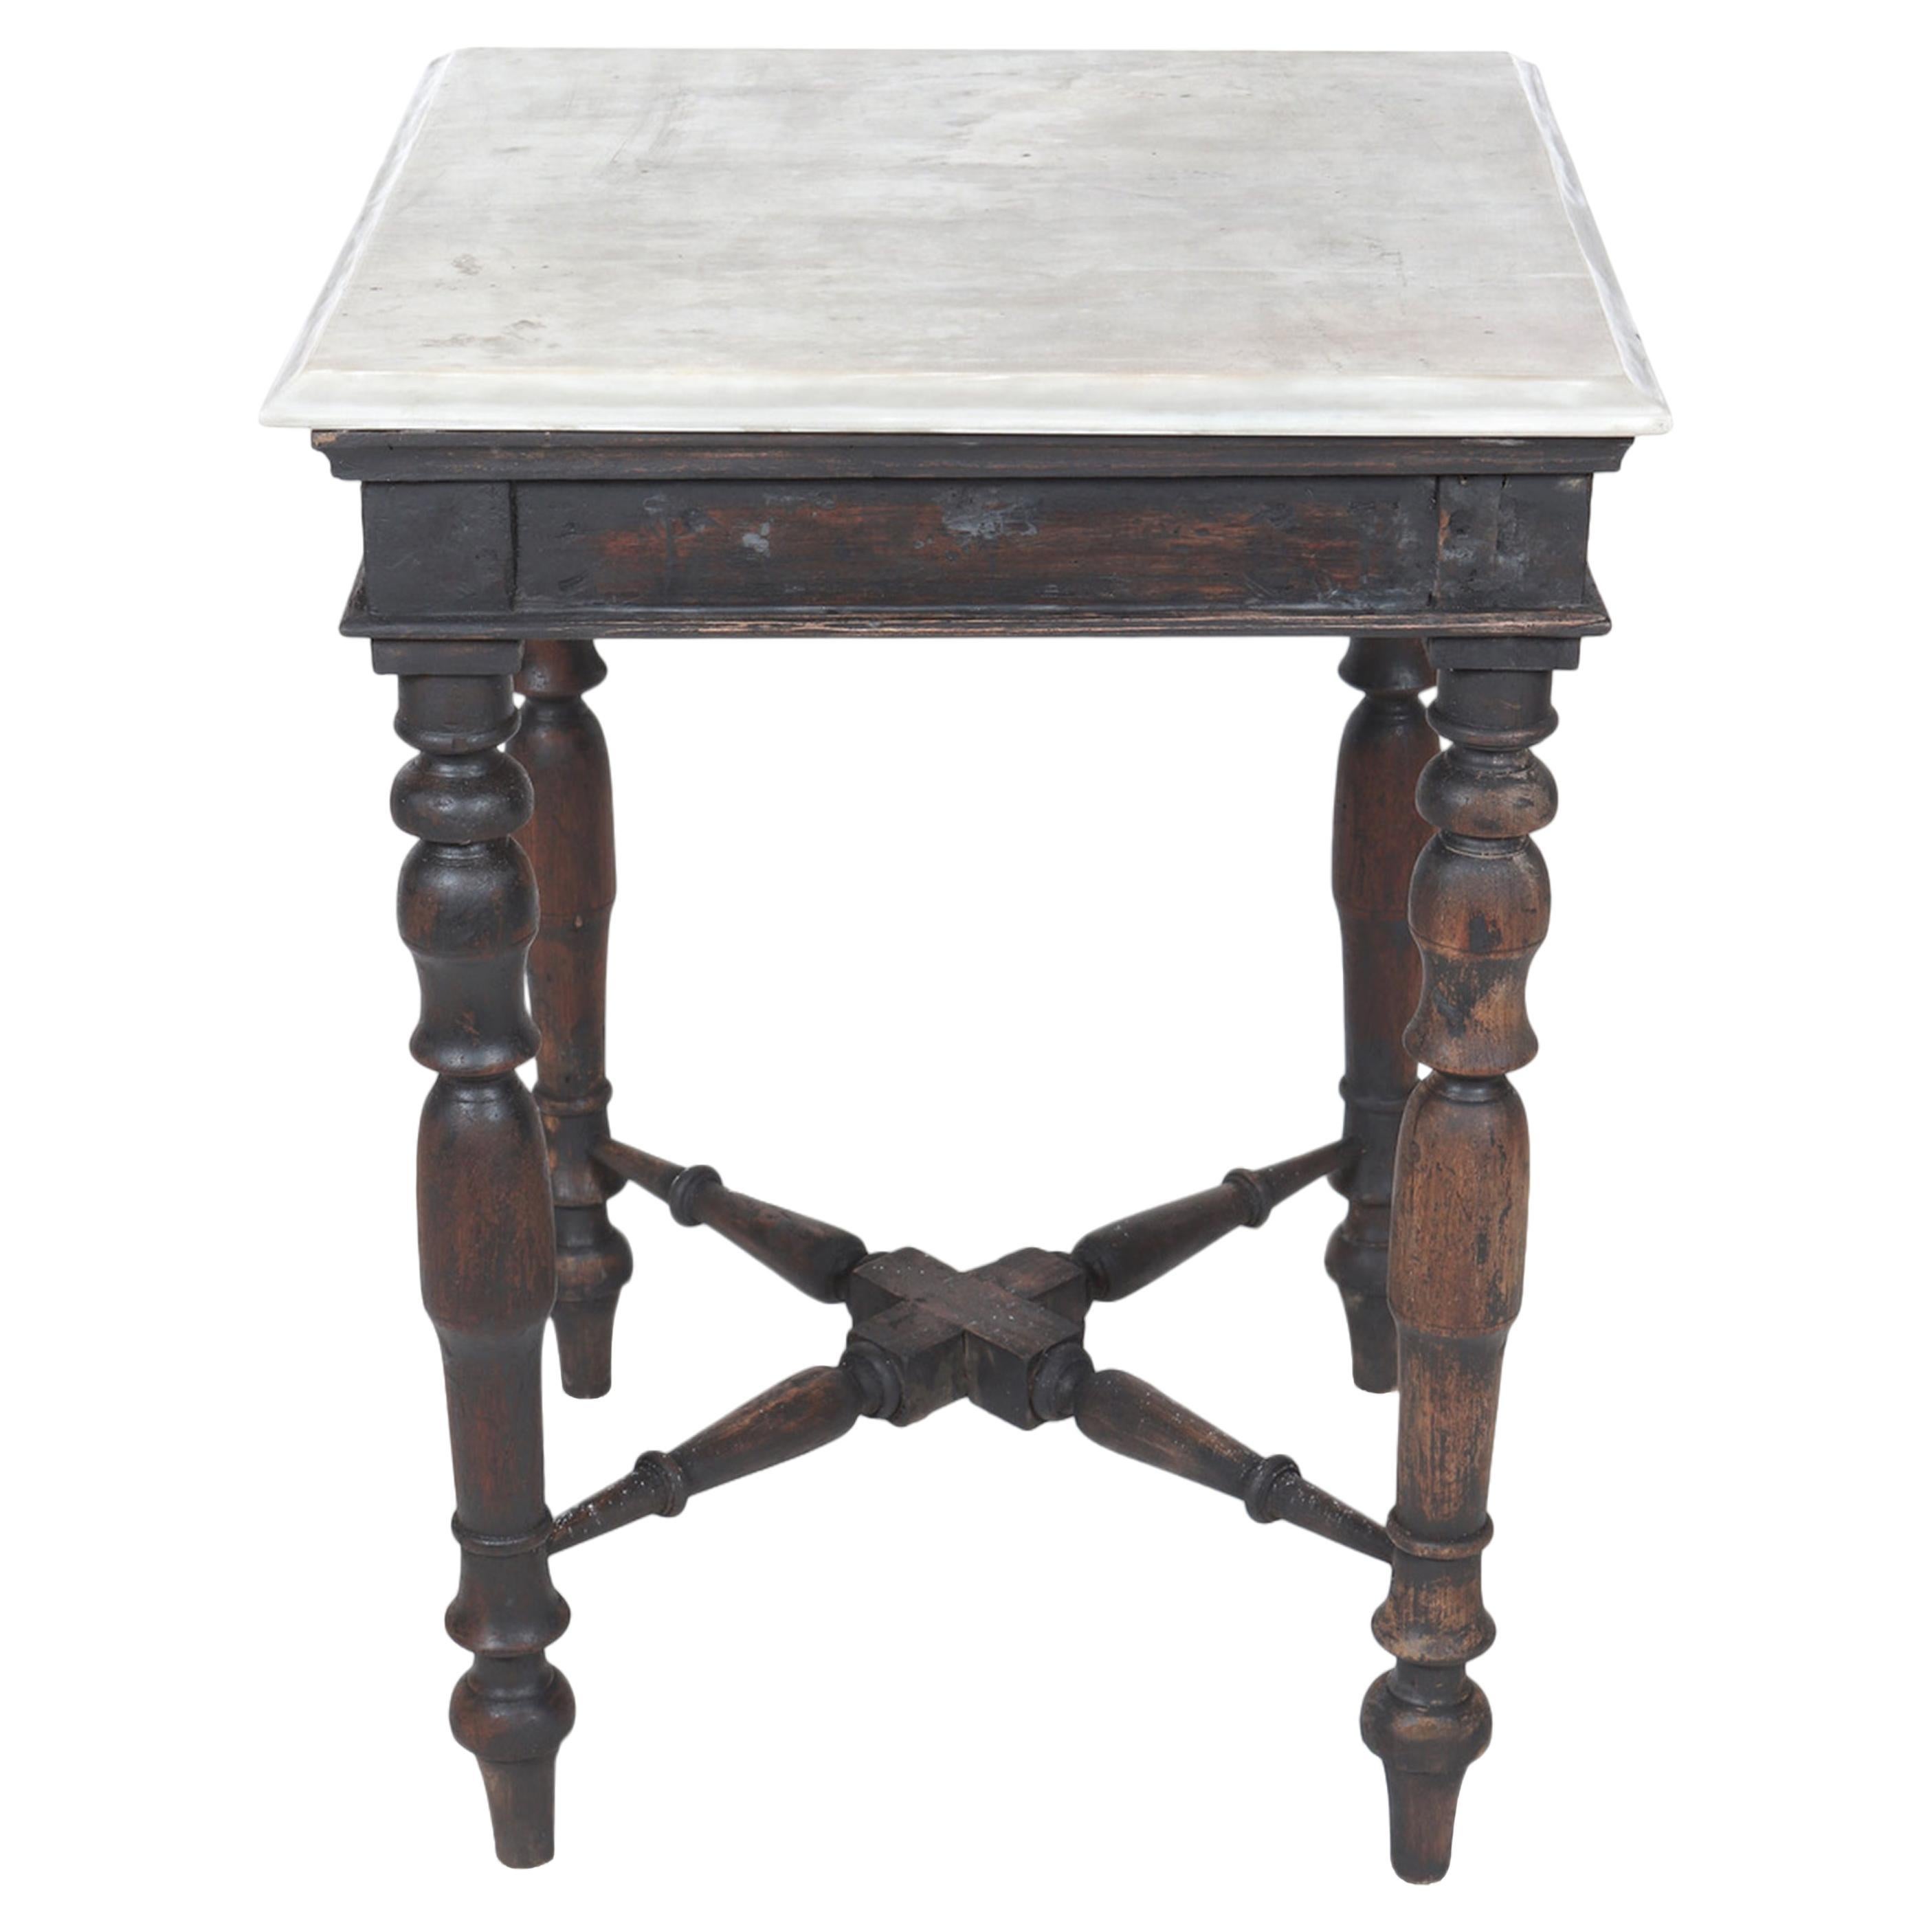 An exquisite teak marble topped side table. The table retains its original Italian beveled edge marble top, with beautifully turned feet and the original cross stretchers at the base.